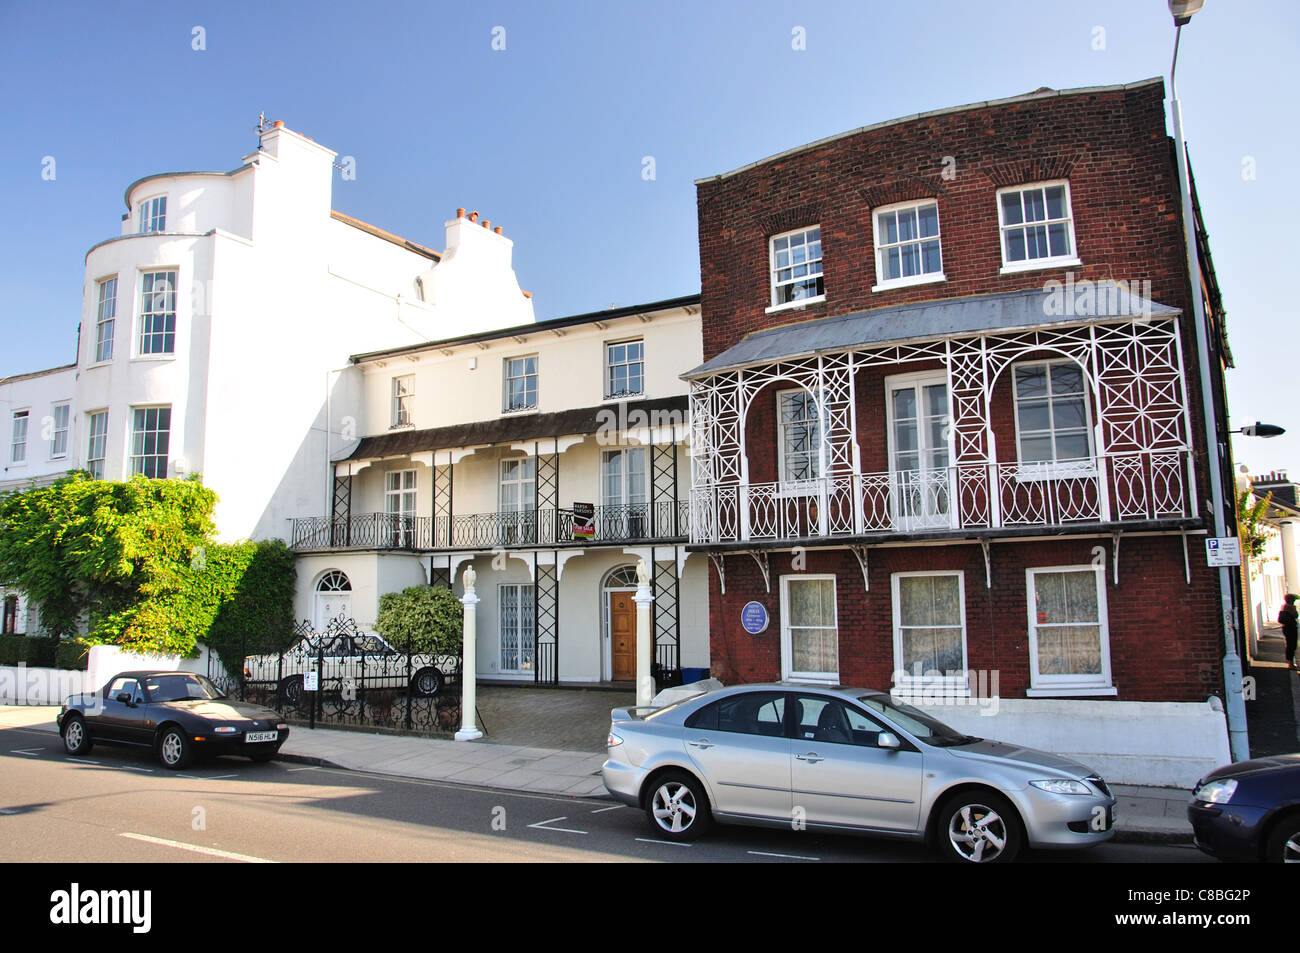 Houses on The Terrace, Barnes, London Borough of Richmond upon Thames, Greater London, England, UK Stock Photo